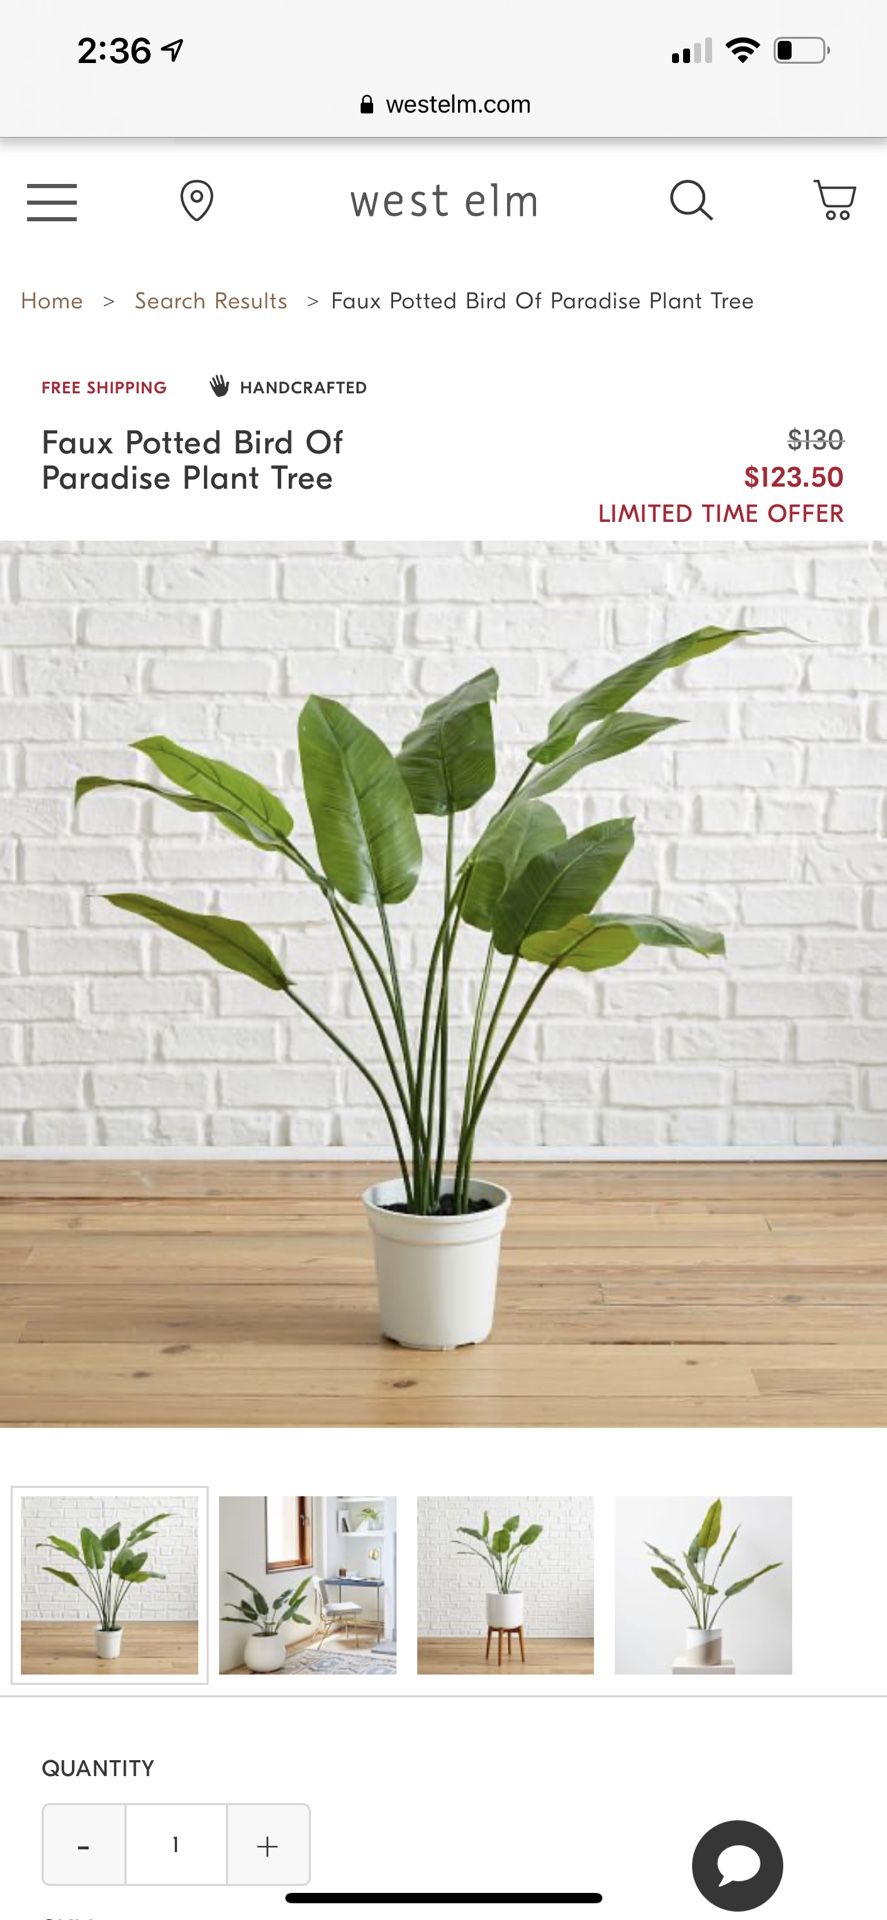 west elm Faux Potted Bird Of Paradise Plant Tree